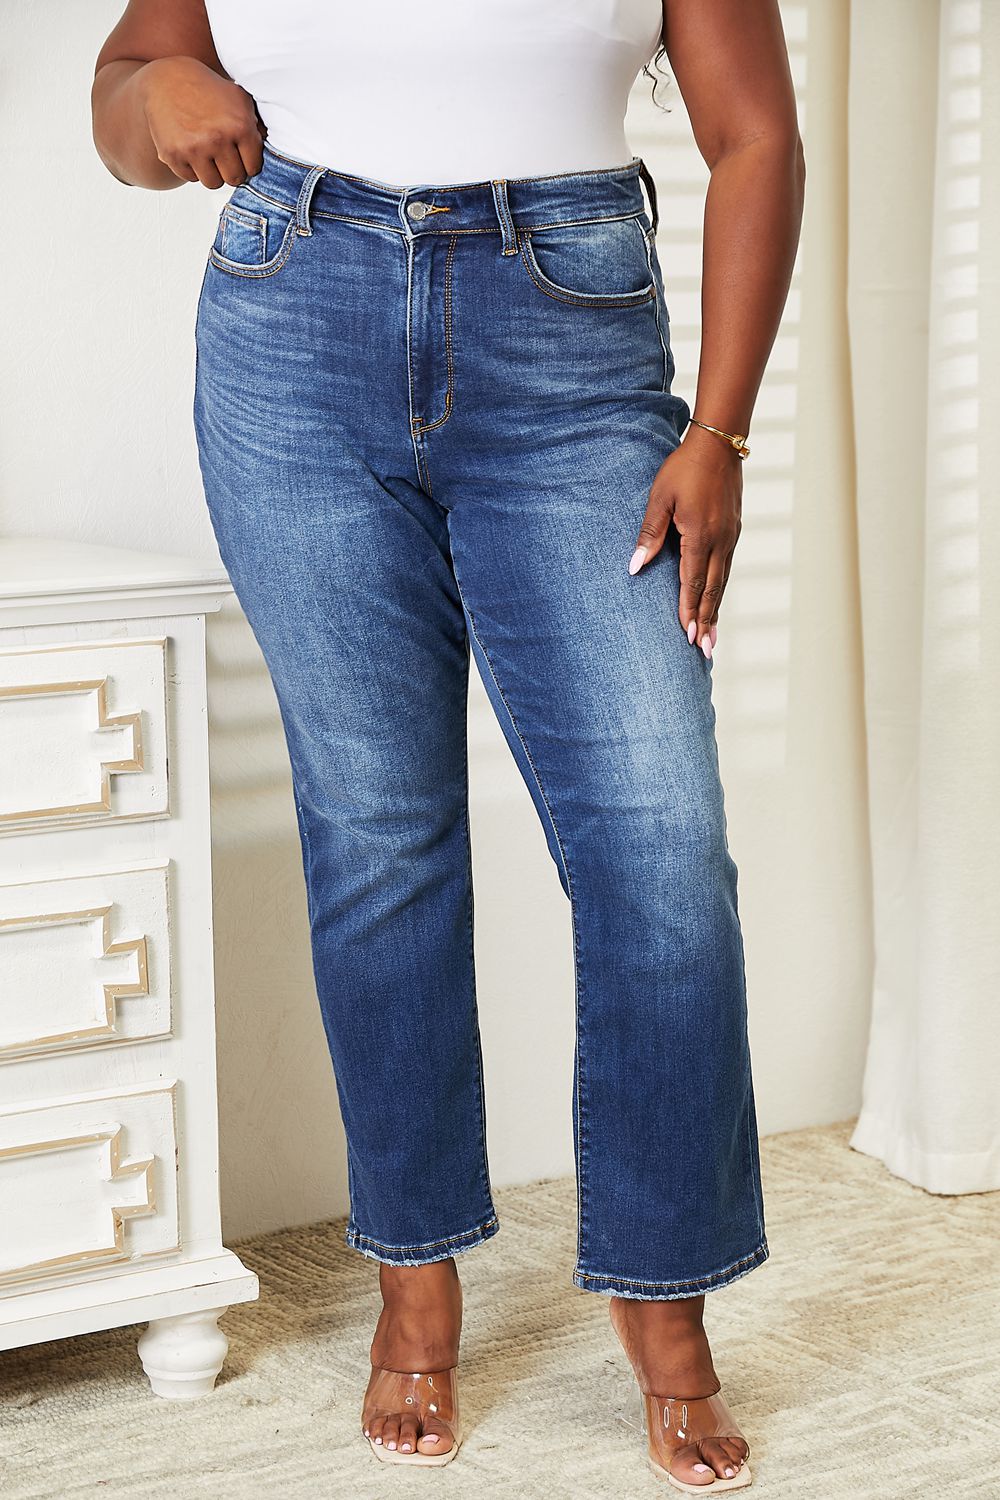 Rudy Judy Blue High Waist Thermal Straight Jeans